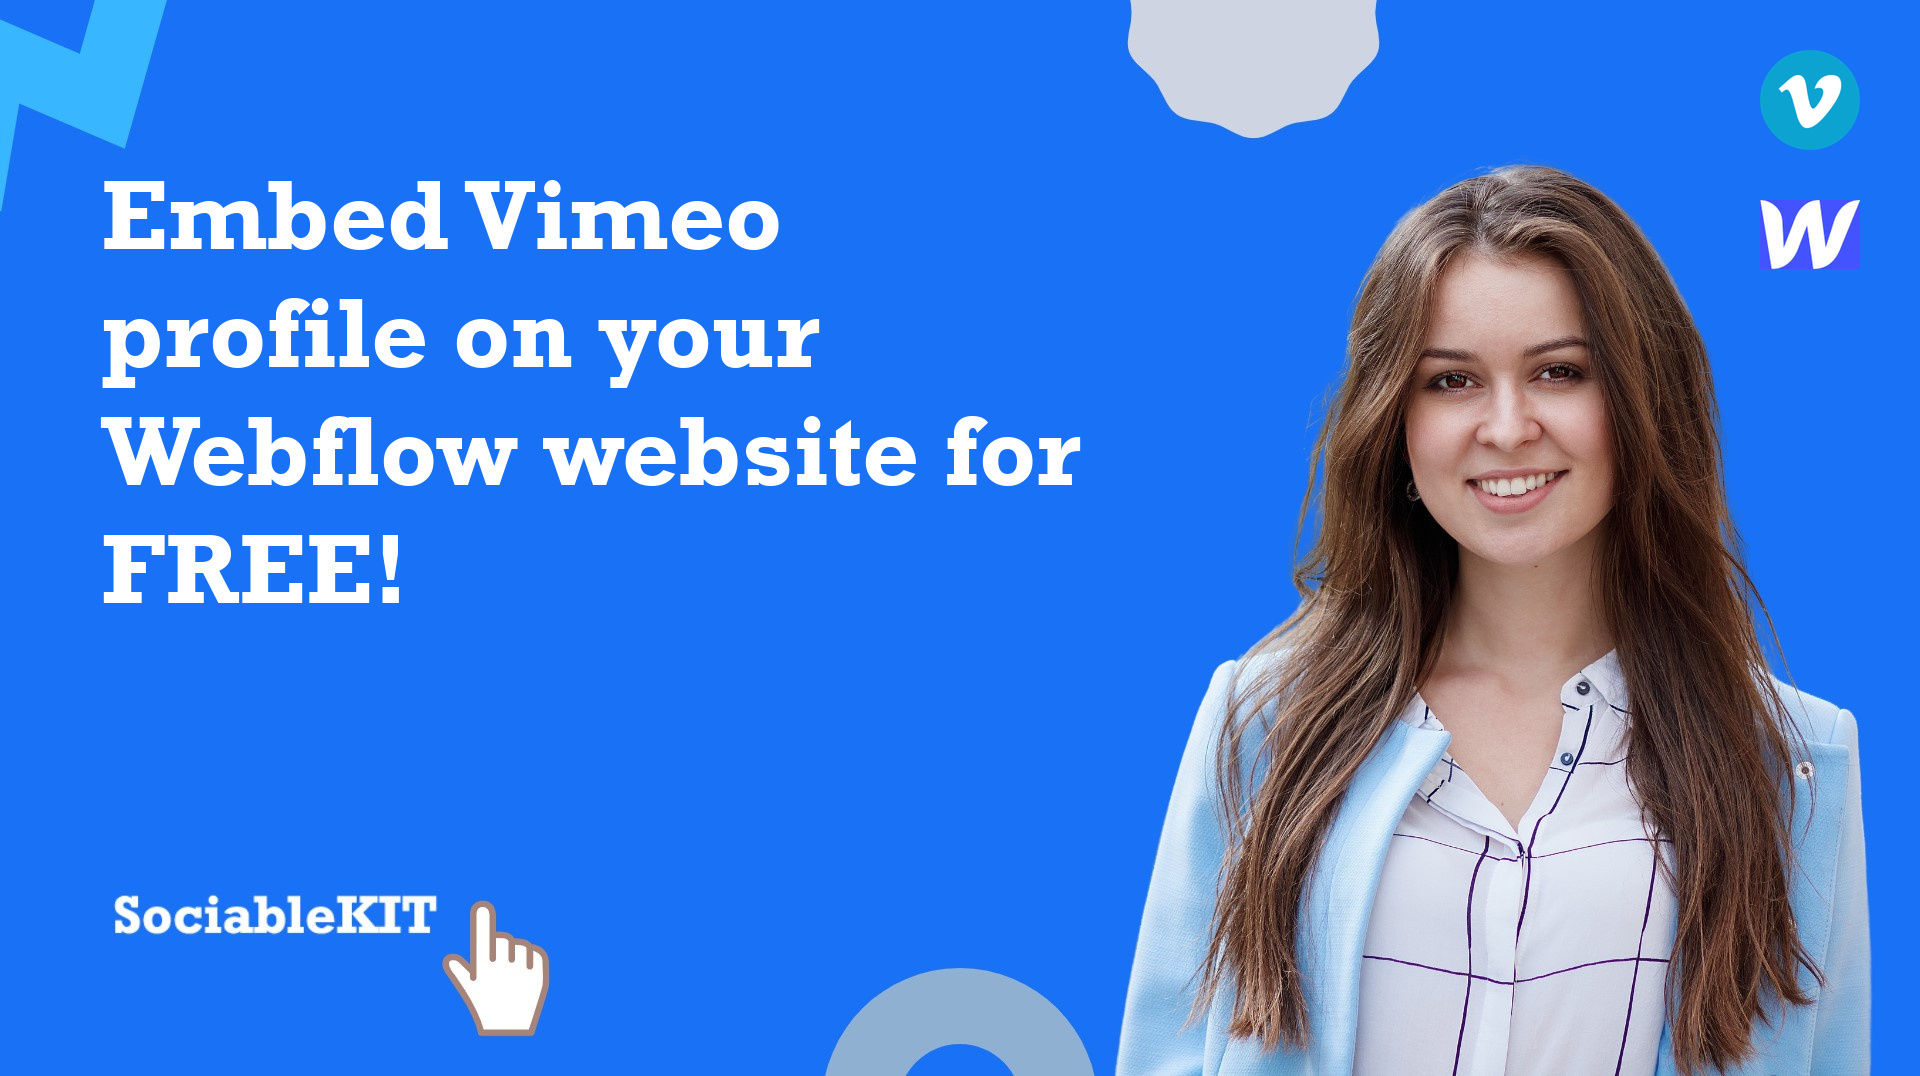 How to embed Vimeo profile on your Webflow website for FREE?